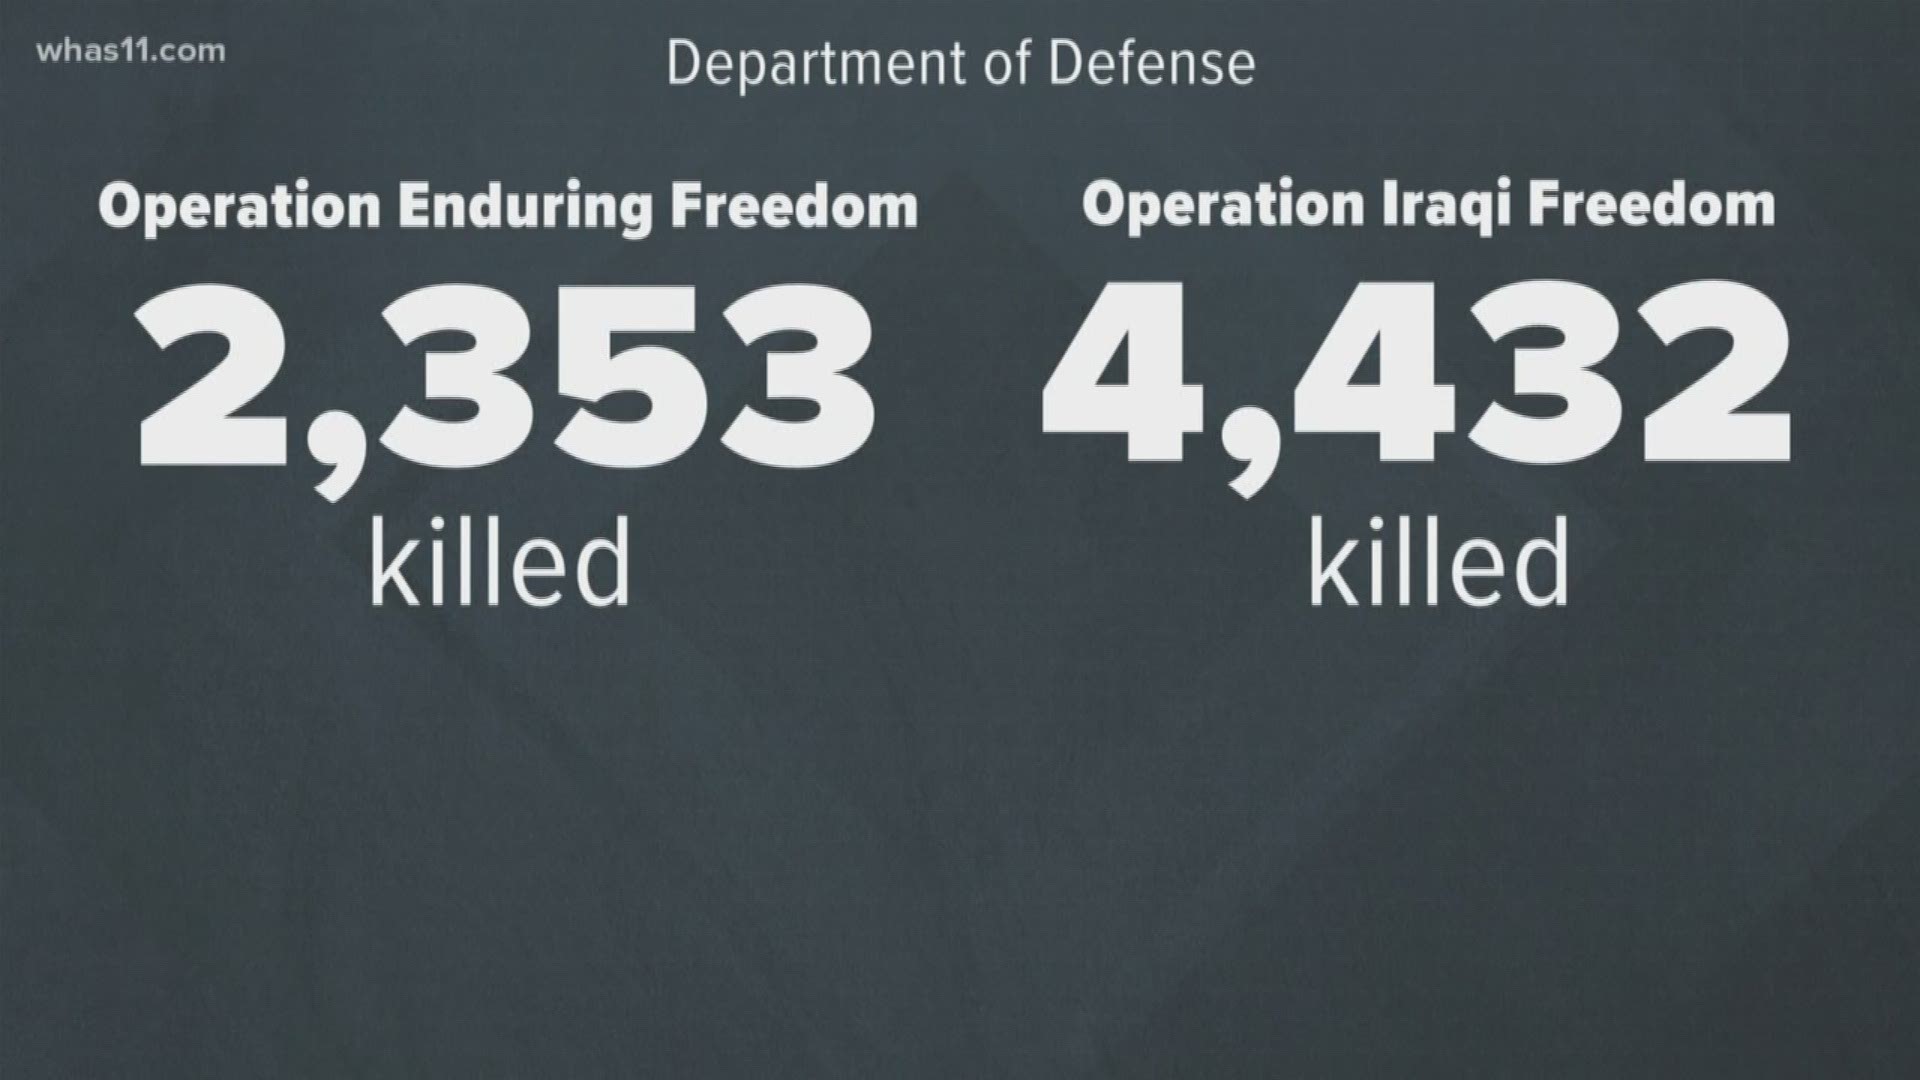 Since George W. Bush first declared the Global War on Terror, the Department of Defense show that over 2,000 people have been killed in Operation Enduring Freedom.